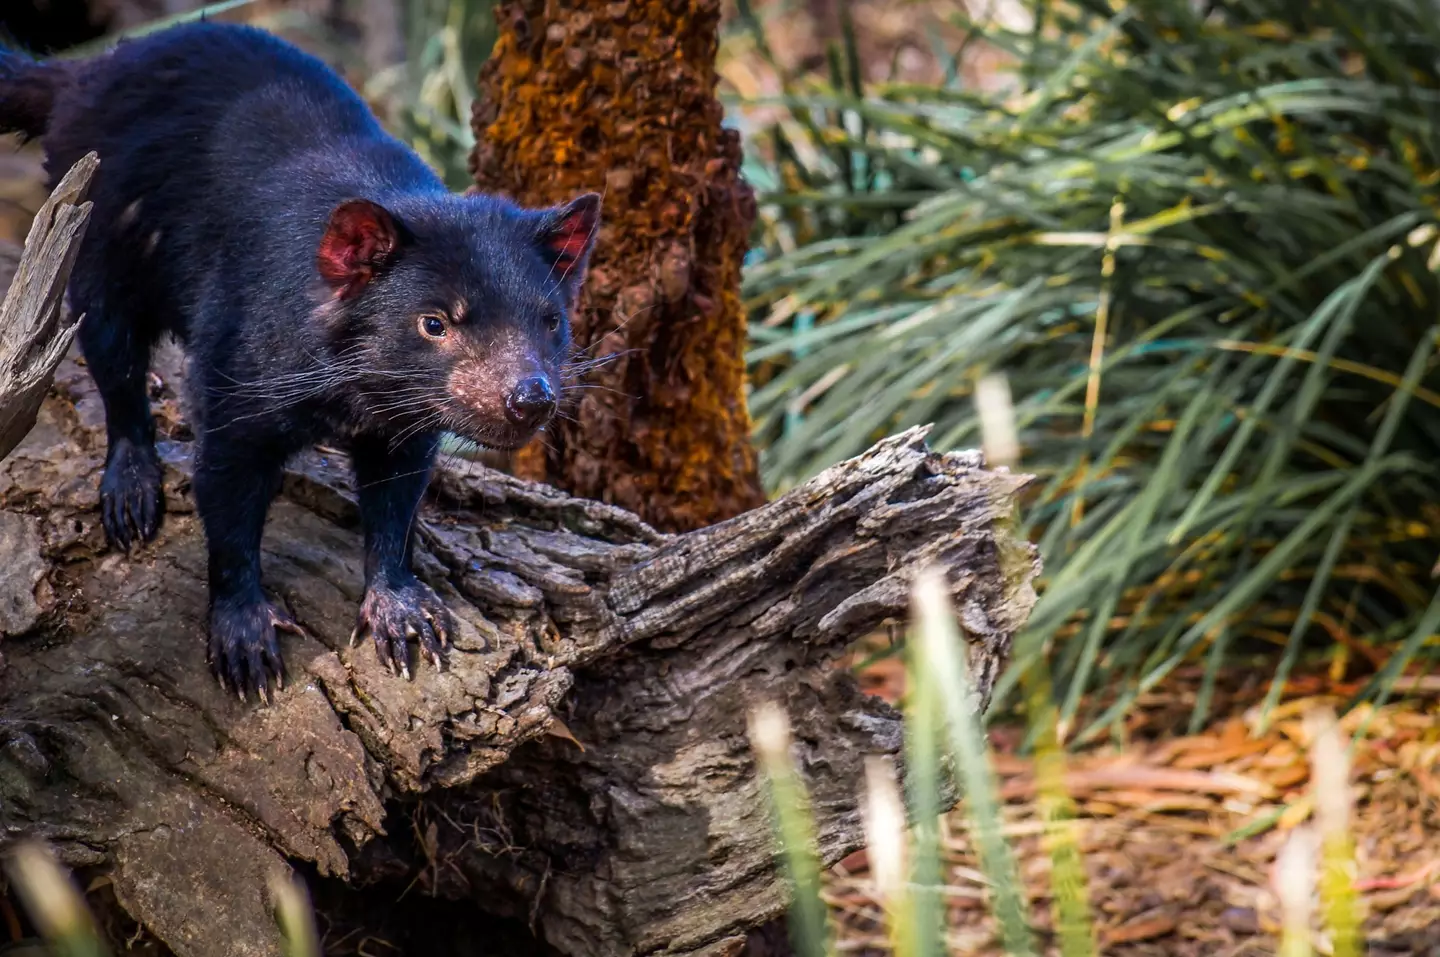 Tasmanian devils aren't known for entering people's houses.